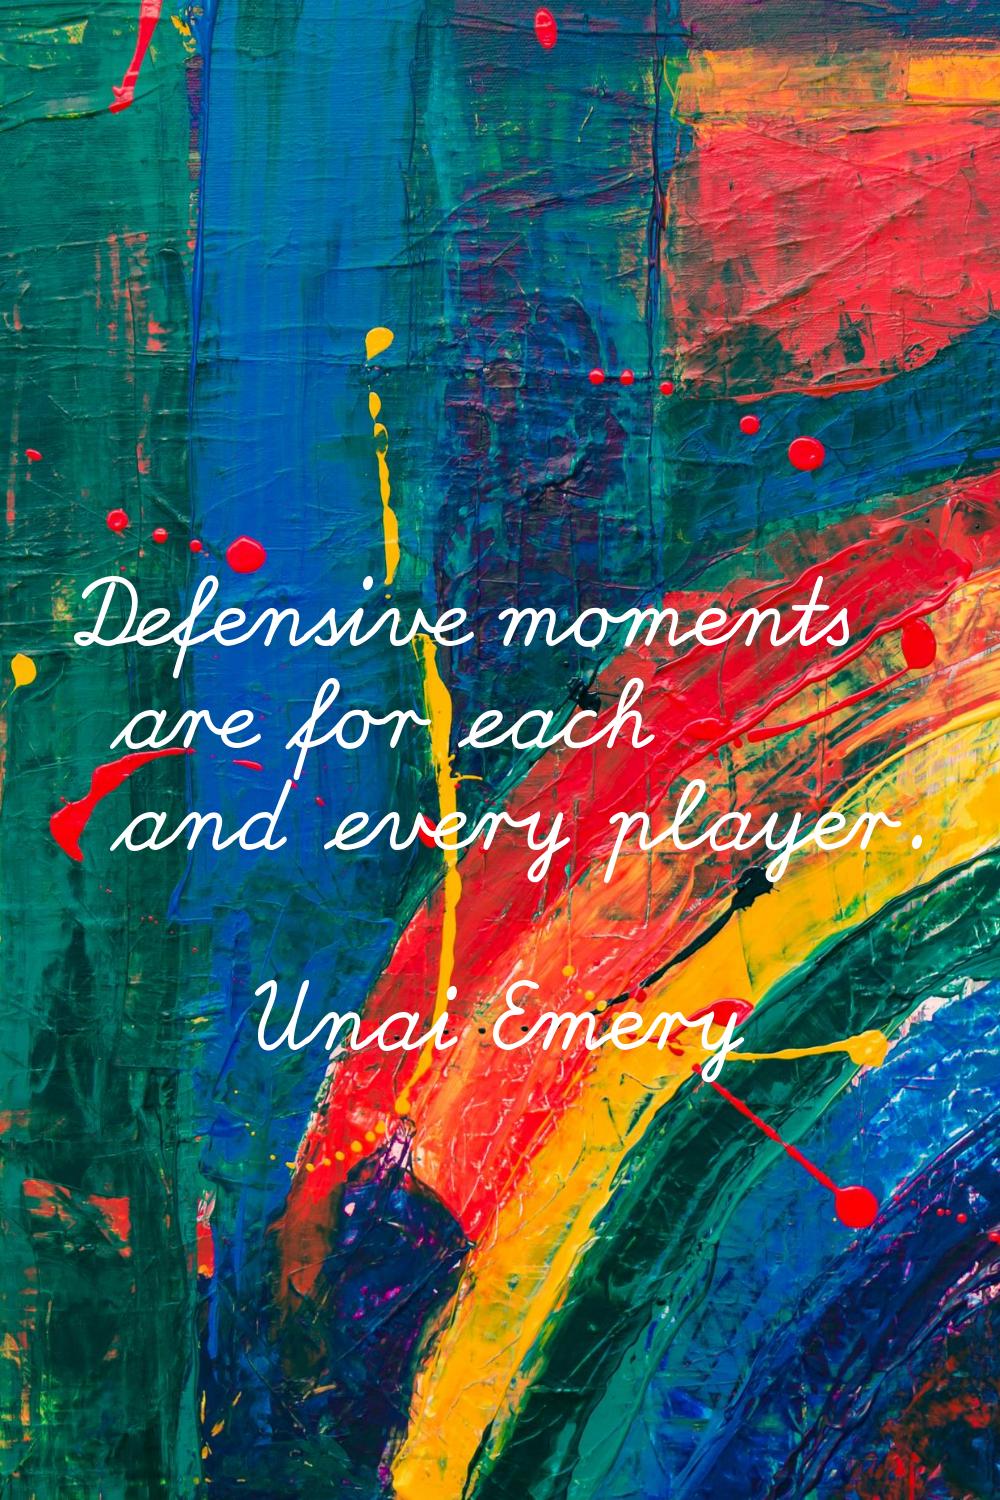 Defensive moments are for each and every player.